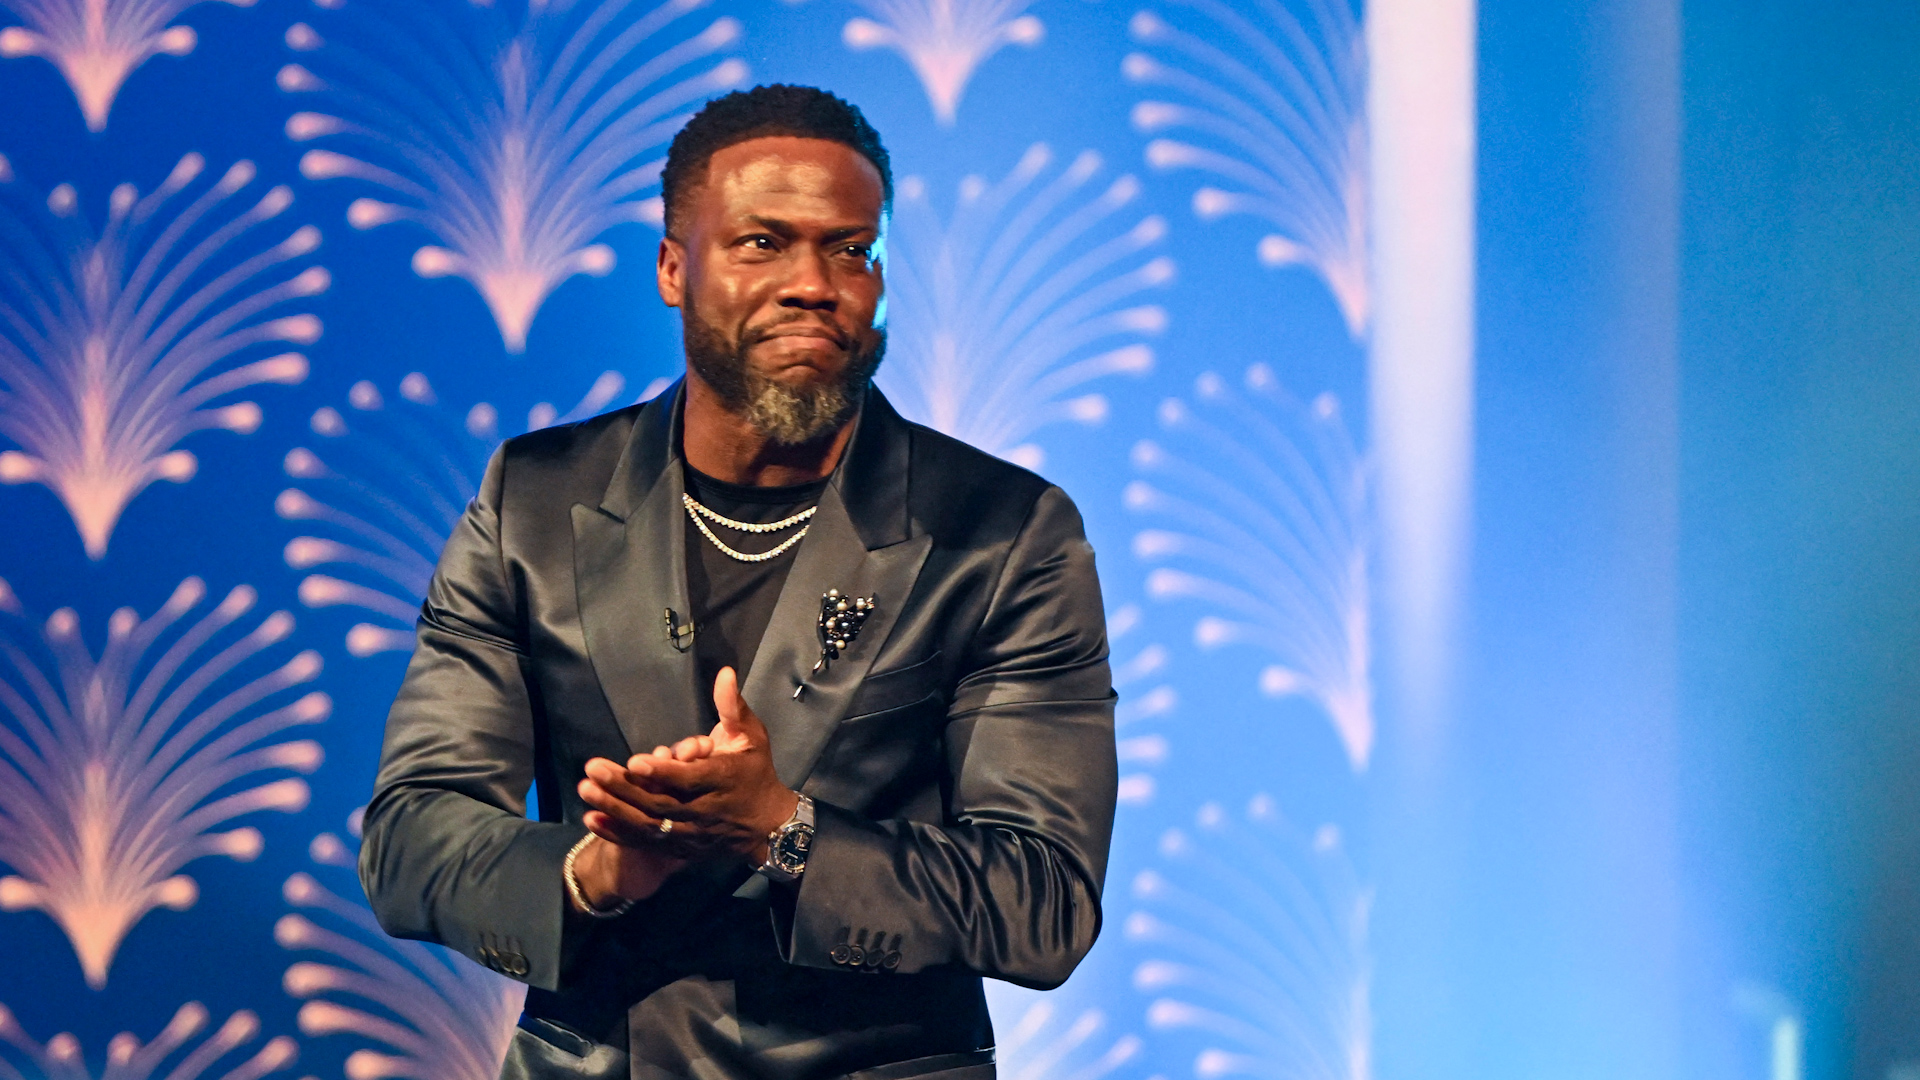 Kevin Hart gets choked up as he accepts the Twain Prize for humor